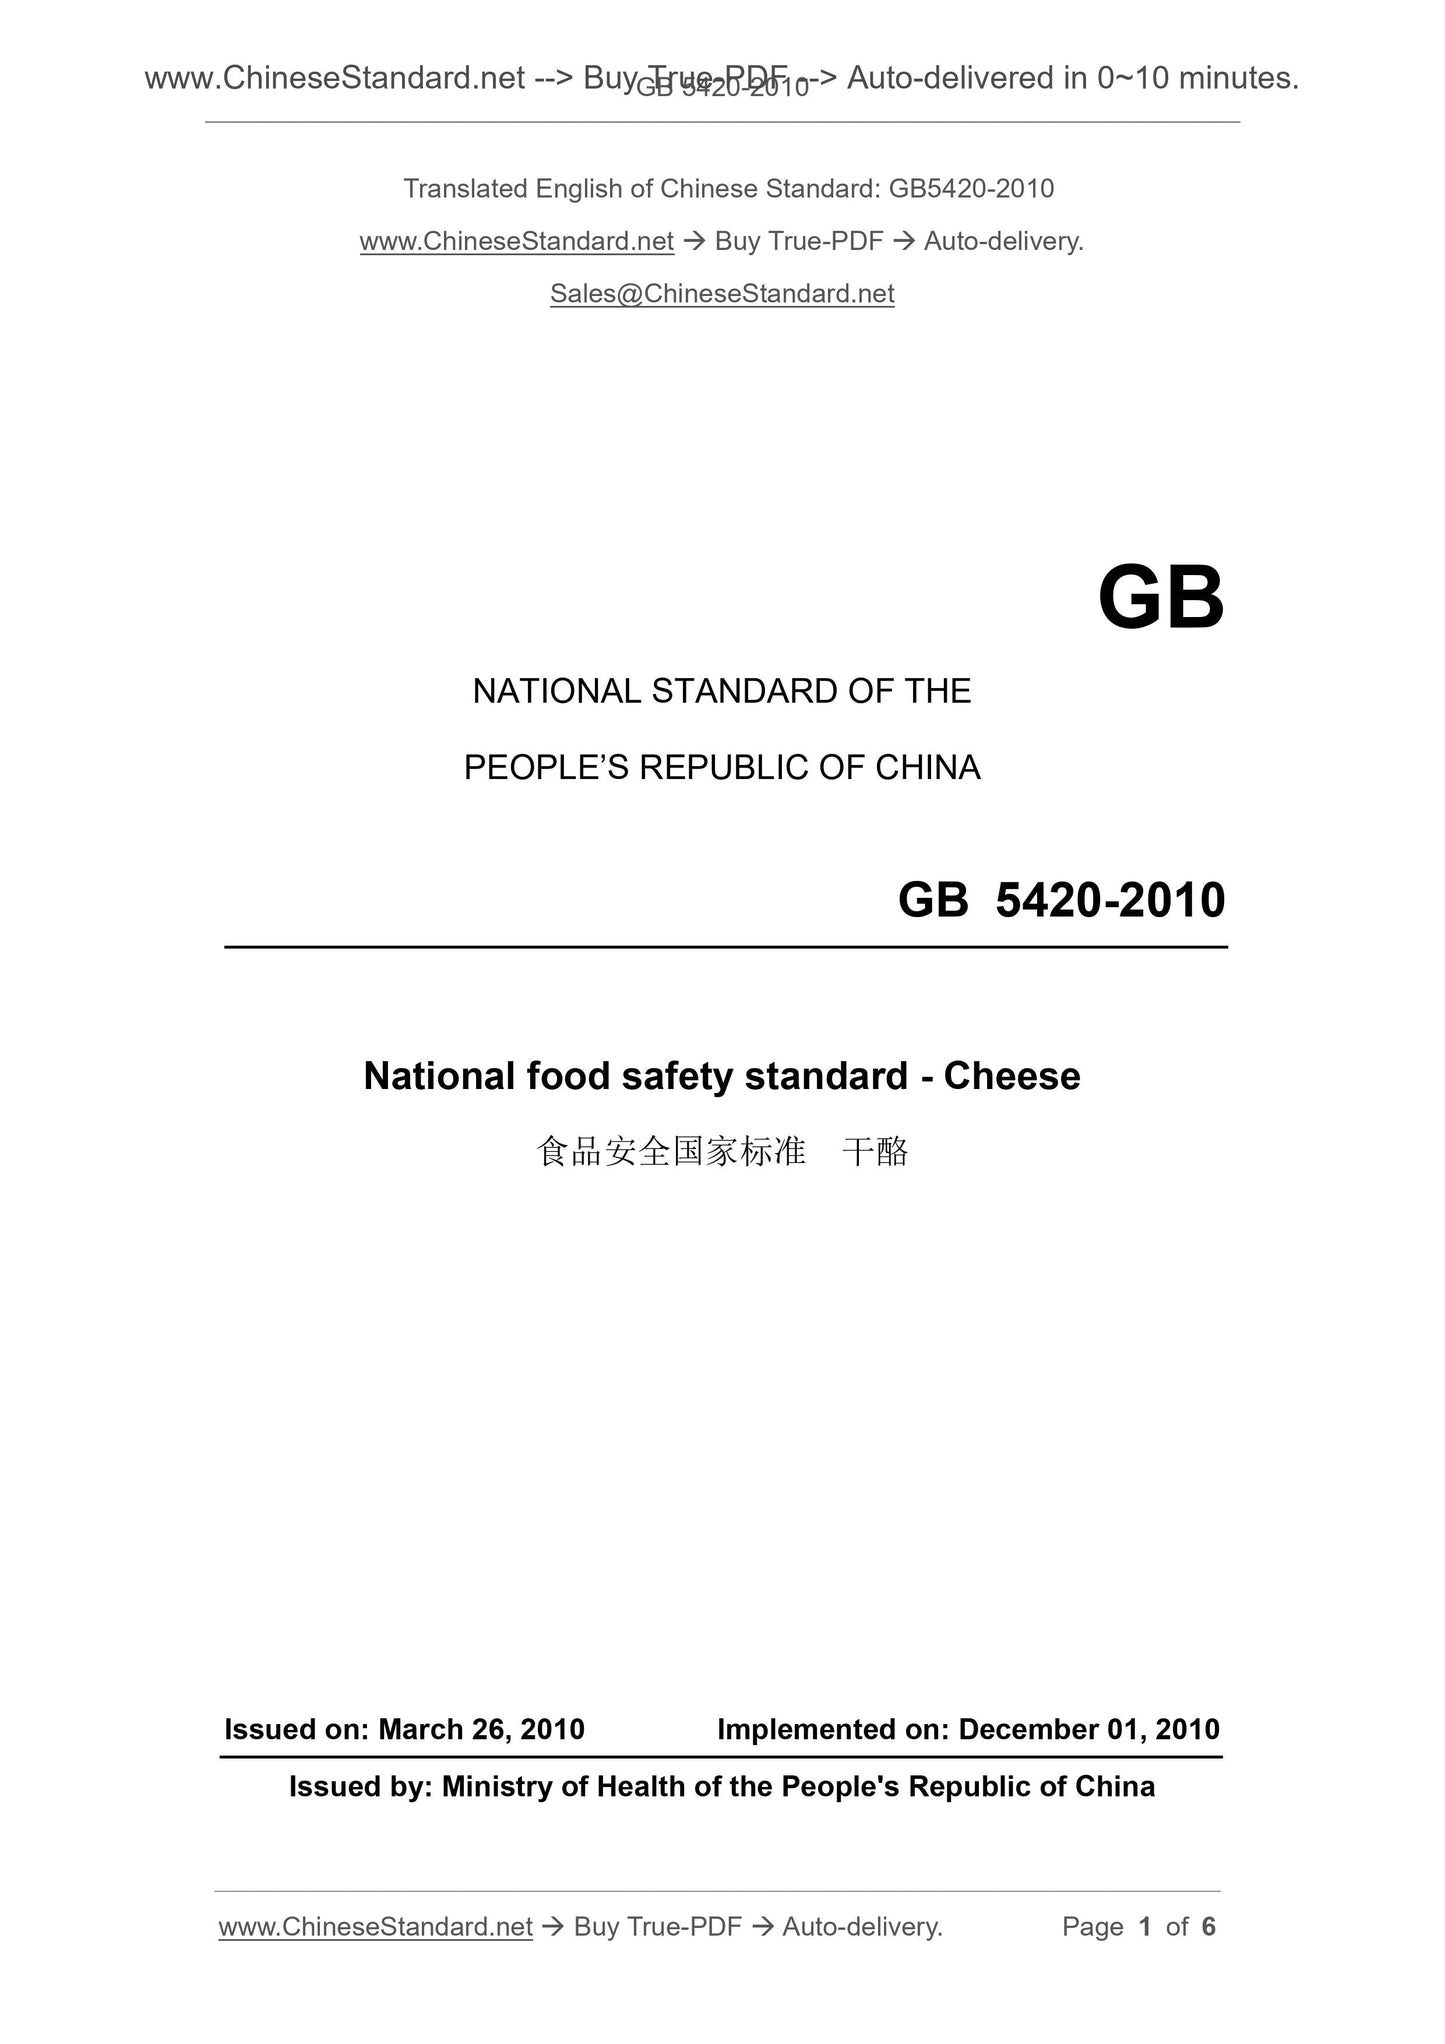 GB 5420-2010 Page 1